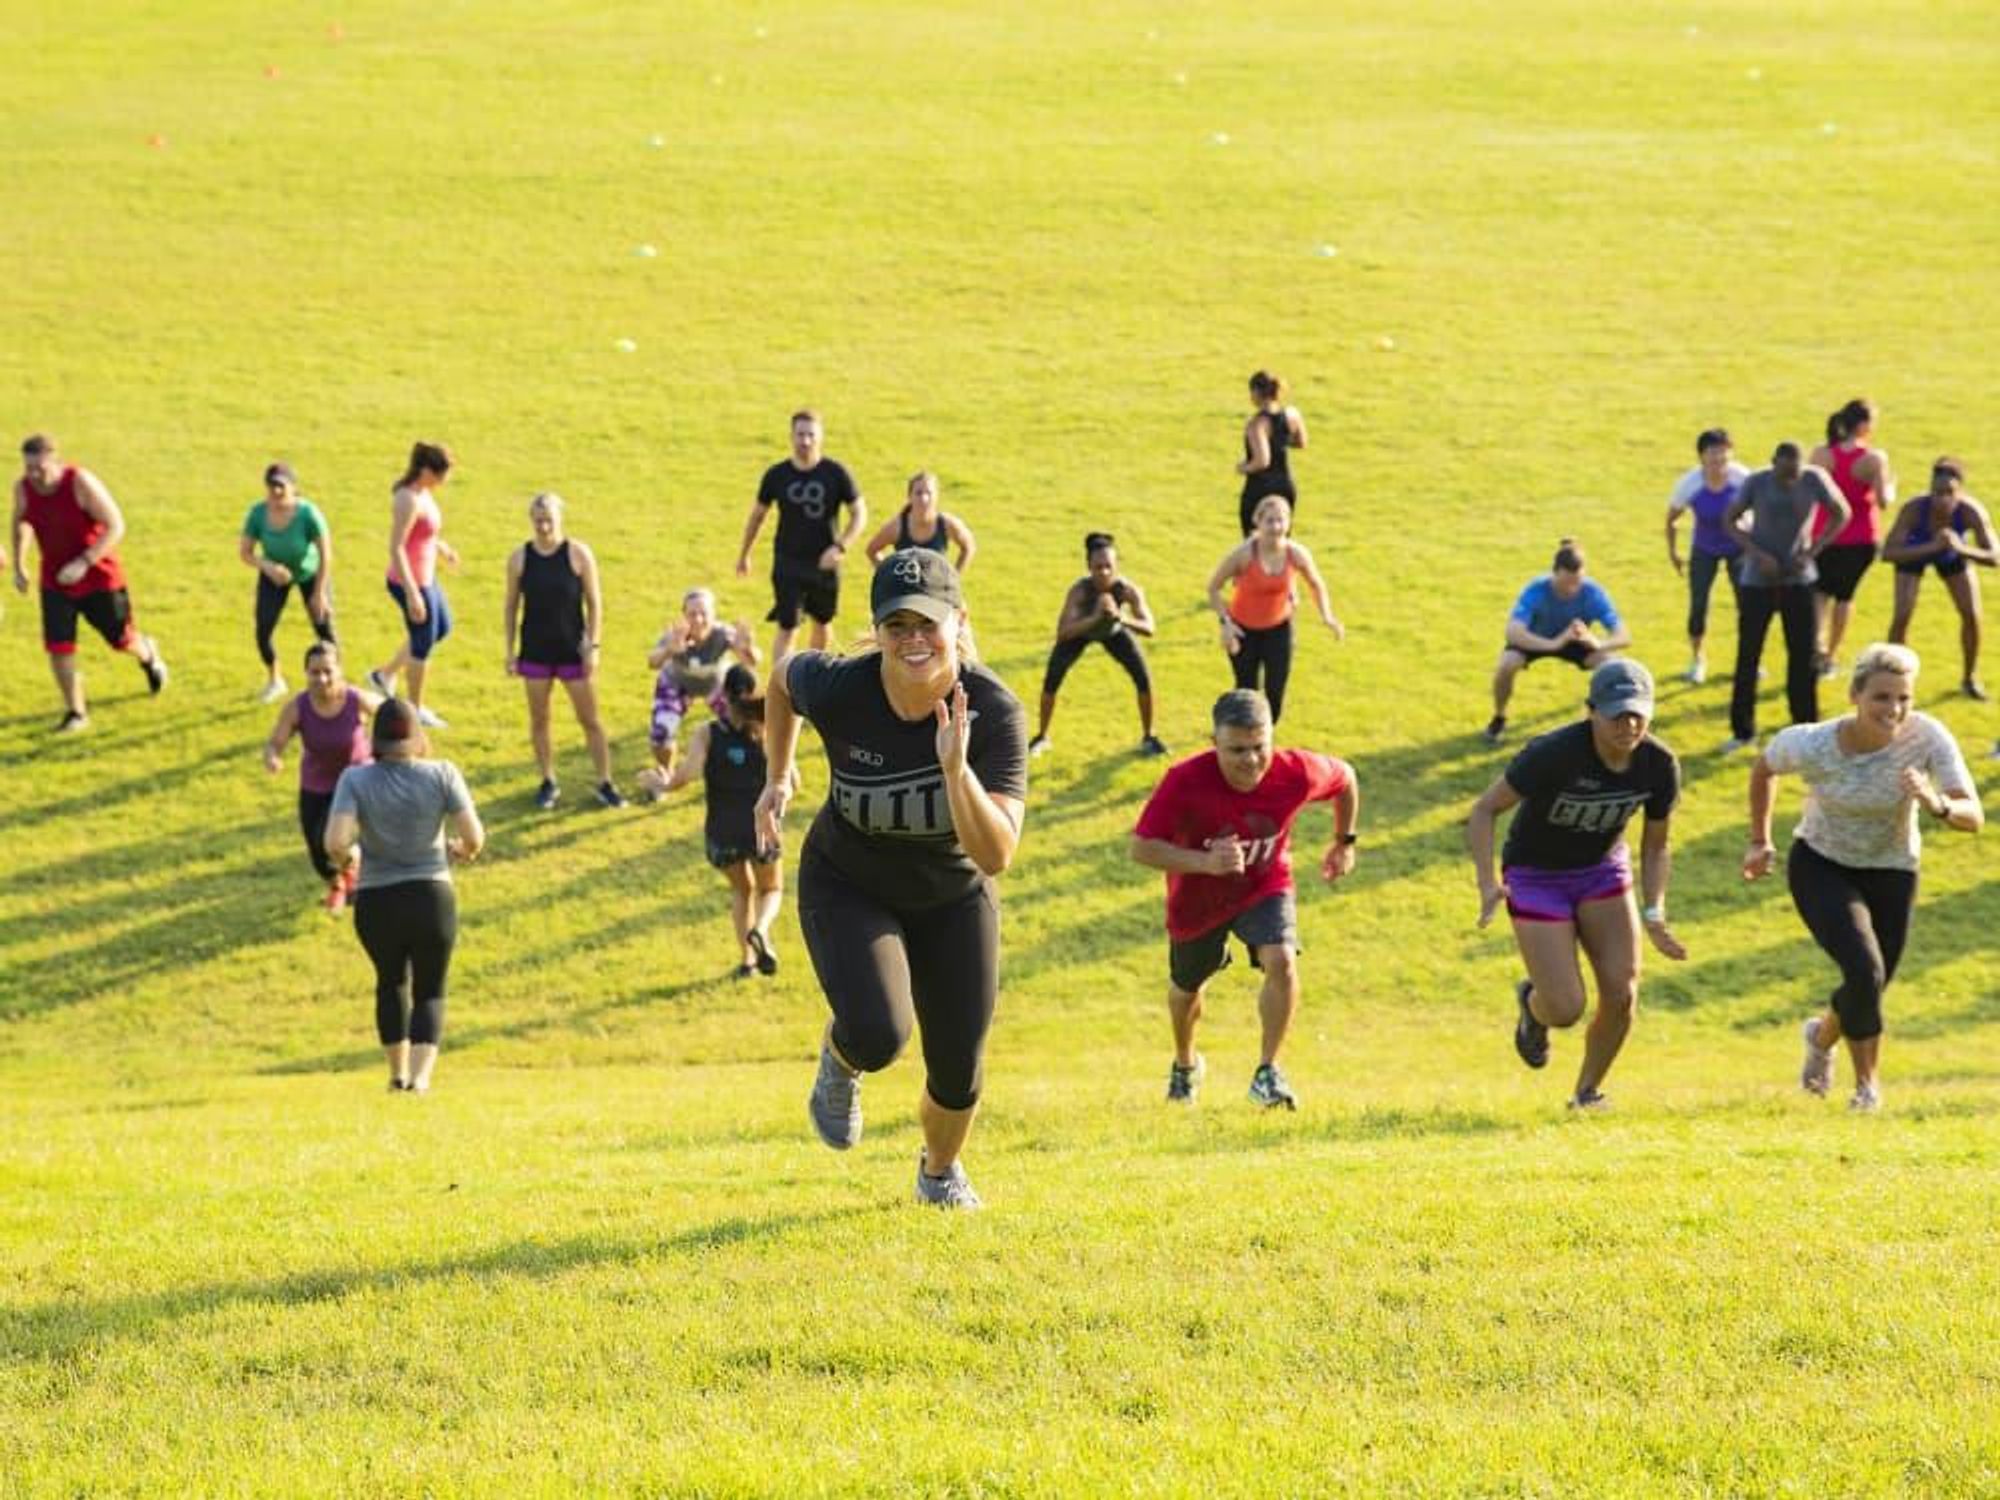 Camp Gladiator runners hill park exercise